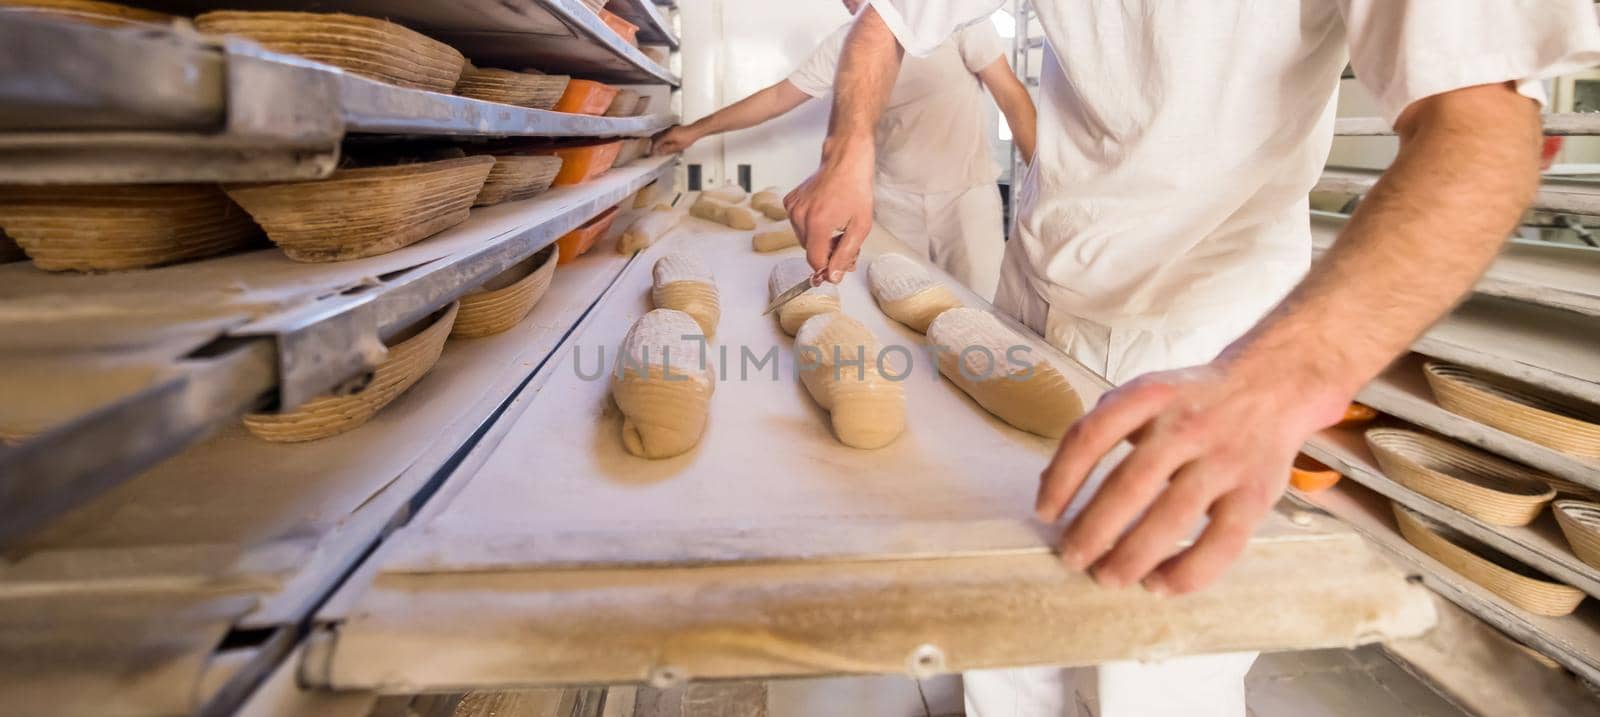 bakers preparing the dough for products In a traditional bakery